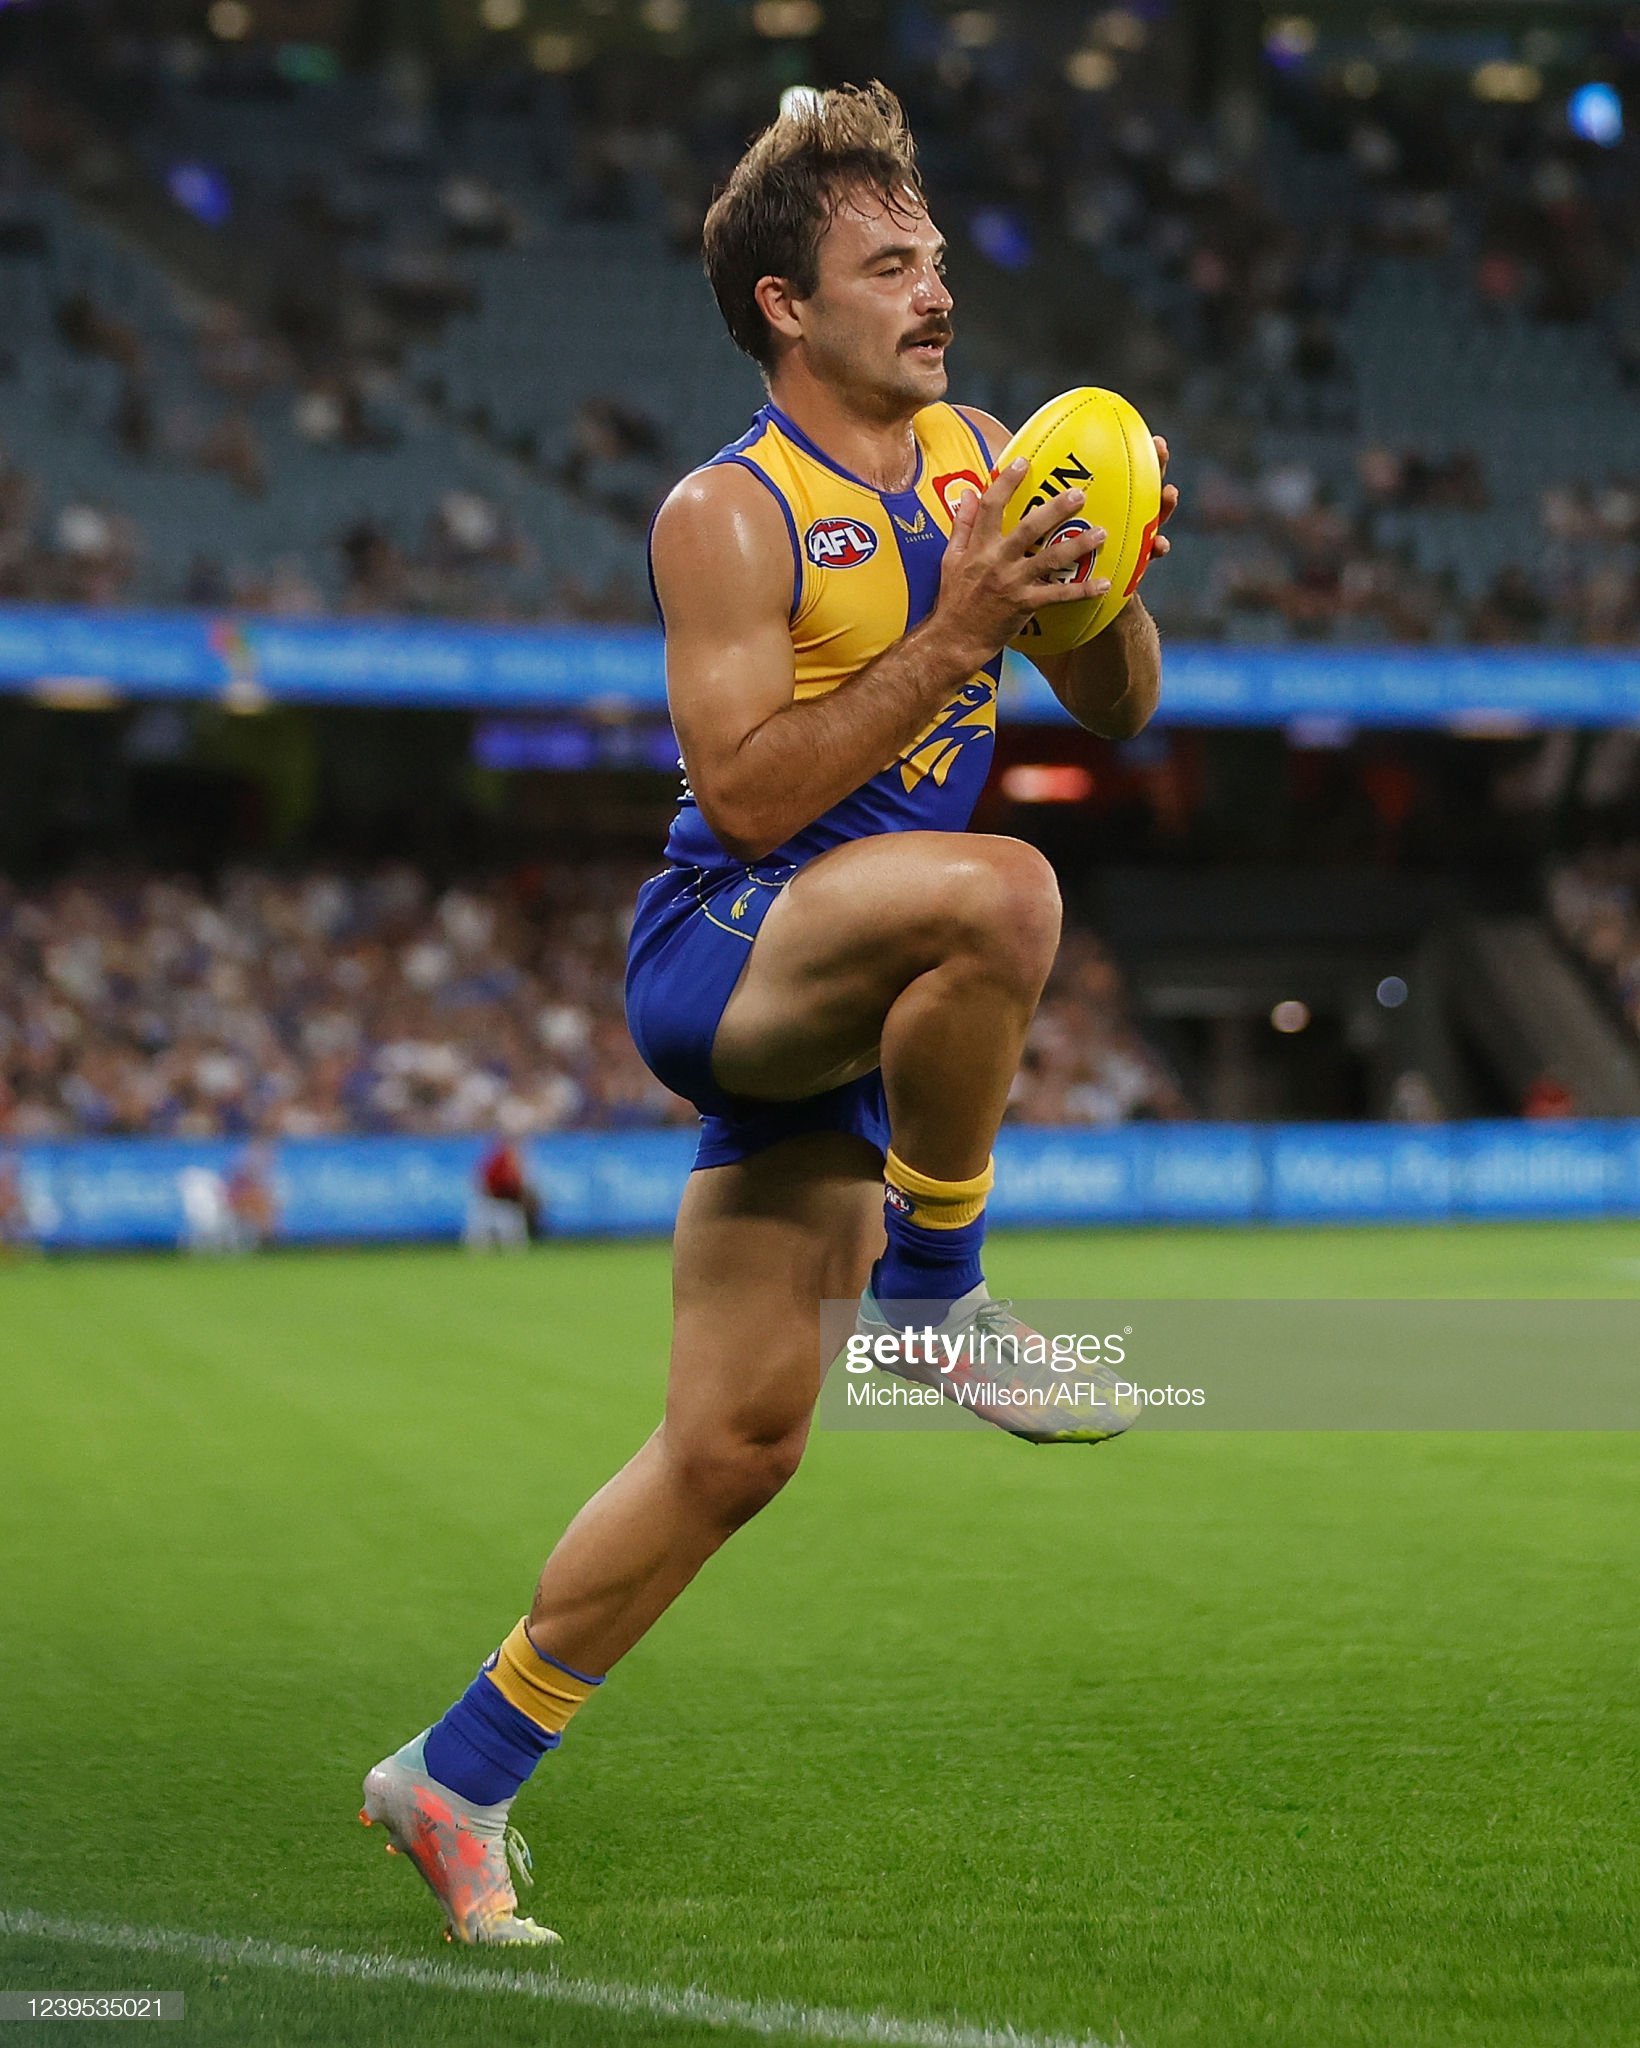 aaron-black-of-the-eagles-in-action-during-the-2022-afl-round-02-picture-id1239535021